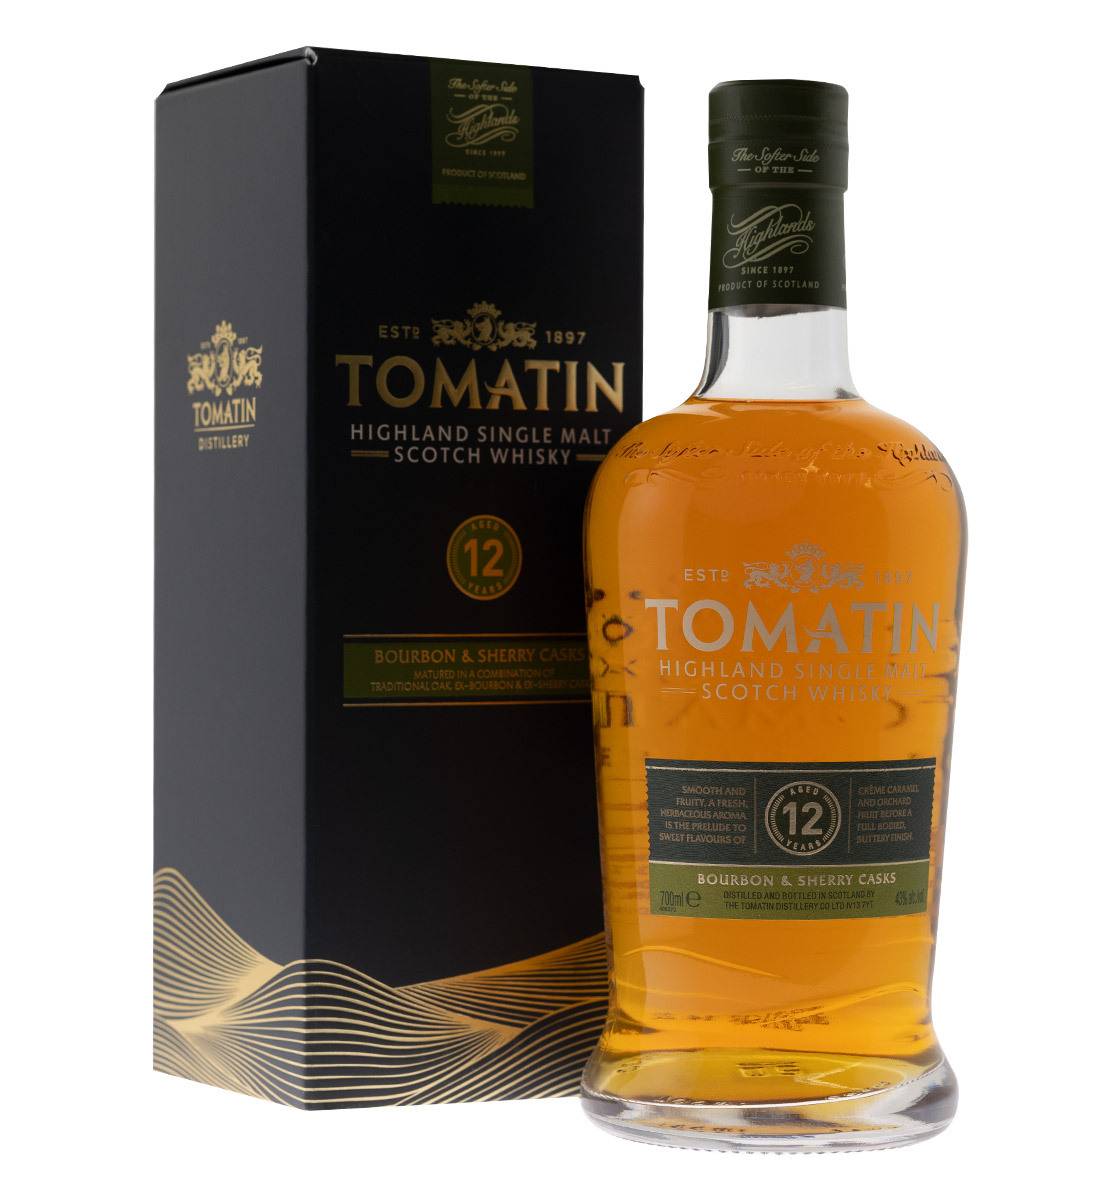 43% Scotch vol. Party Highland 12 · Malt Tomatin · Whisky in 0,7l Kneipe Years Single Bar GP Old · ·